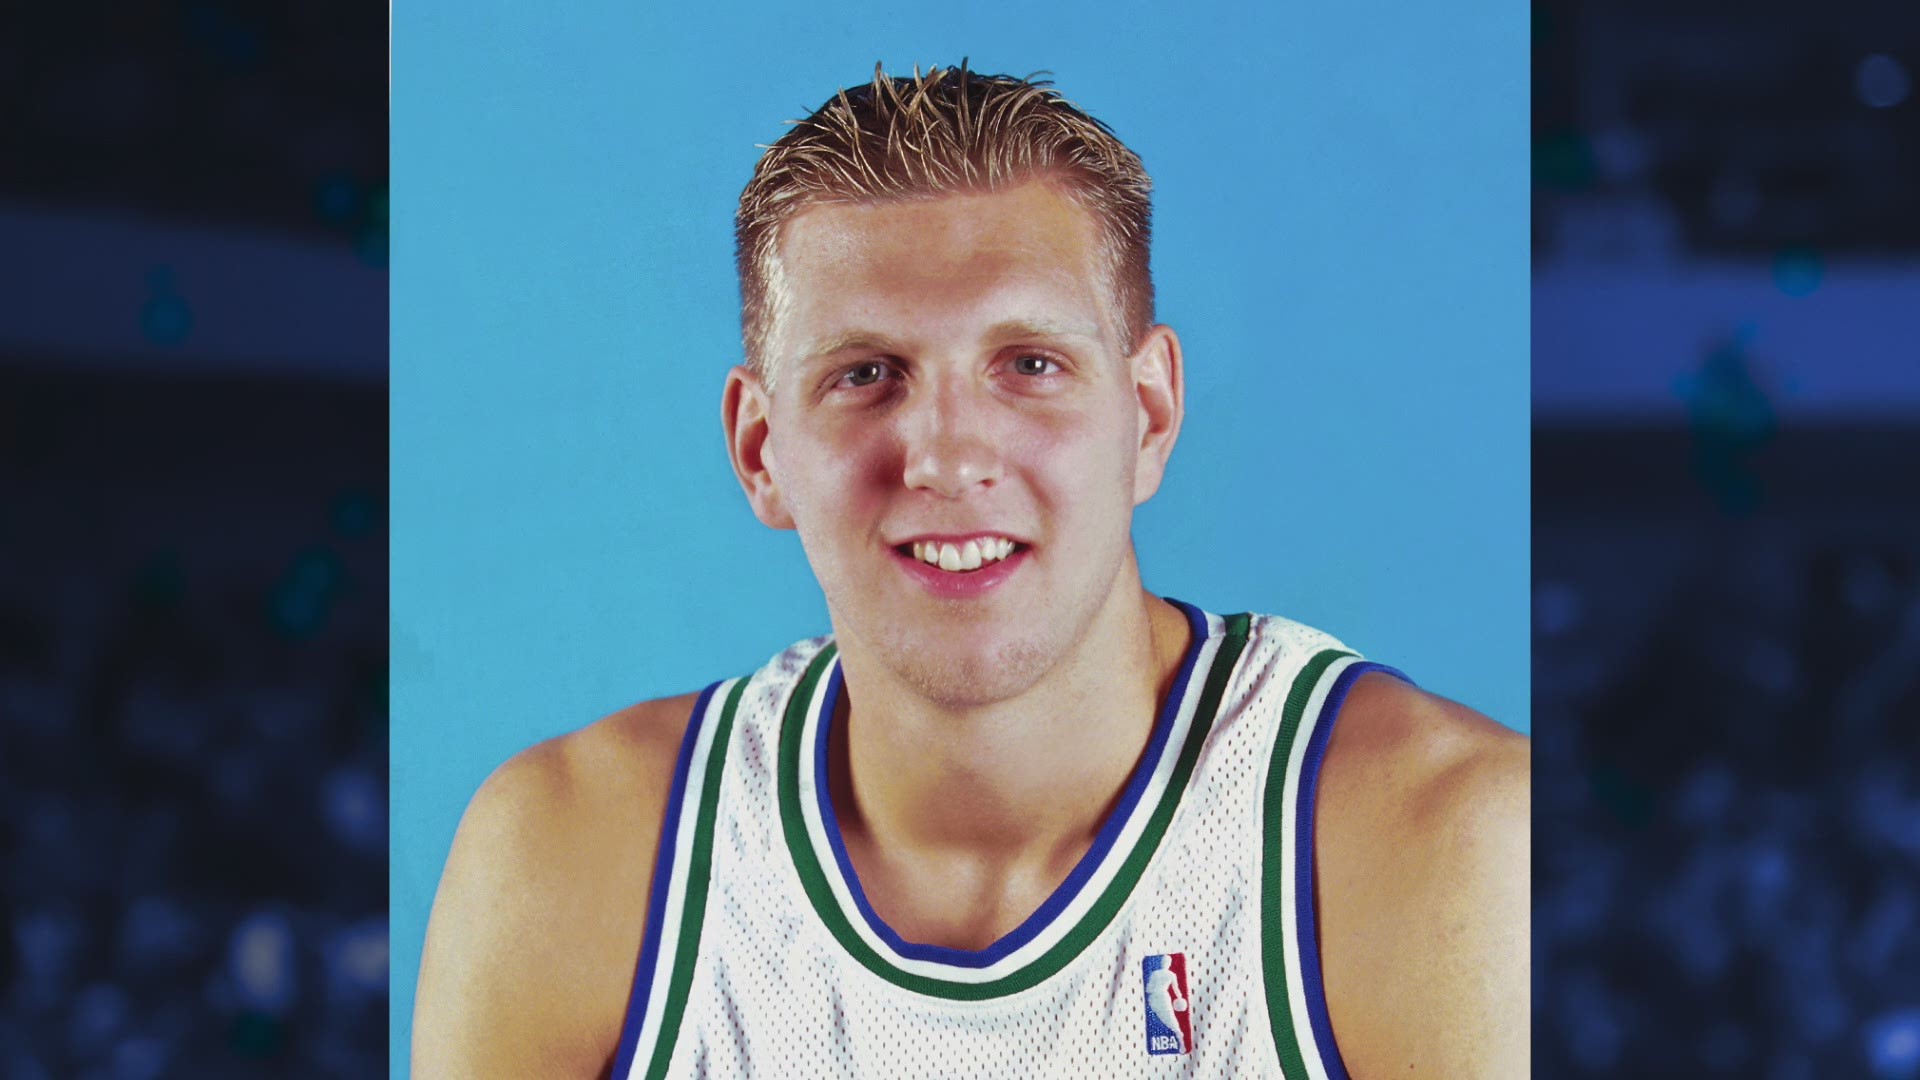 From baby-faced rookie to a Mavericks legend. Watch Dirk's look change over his amazing career.